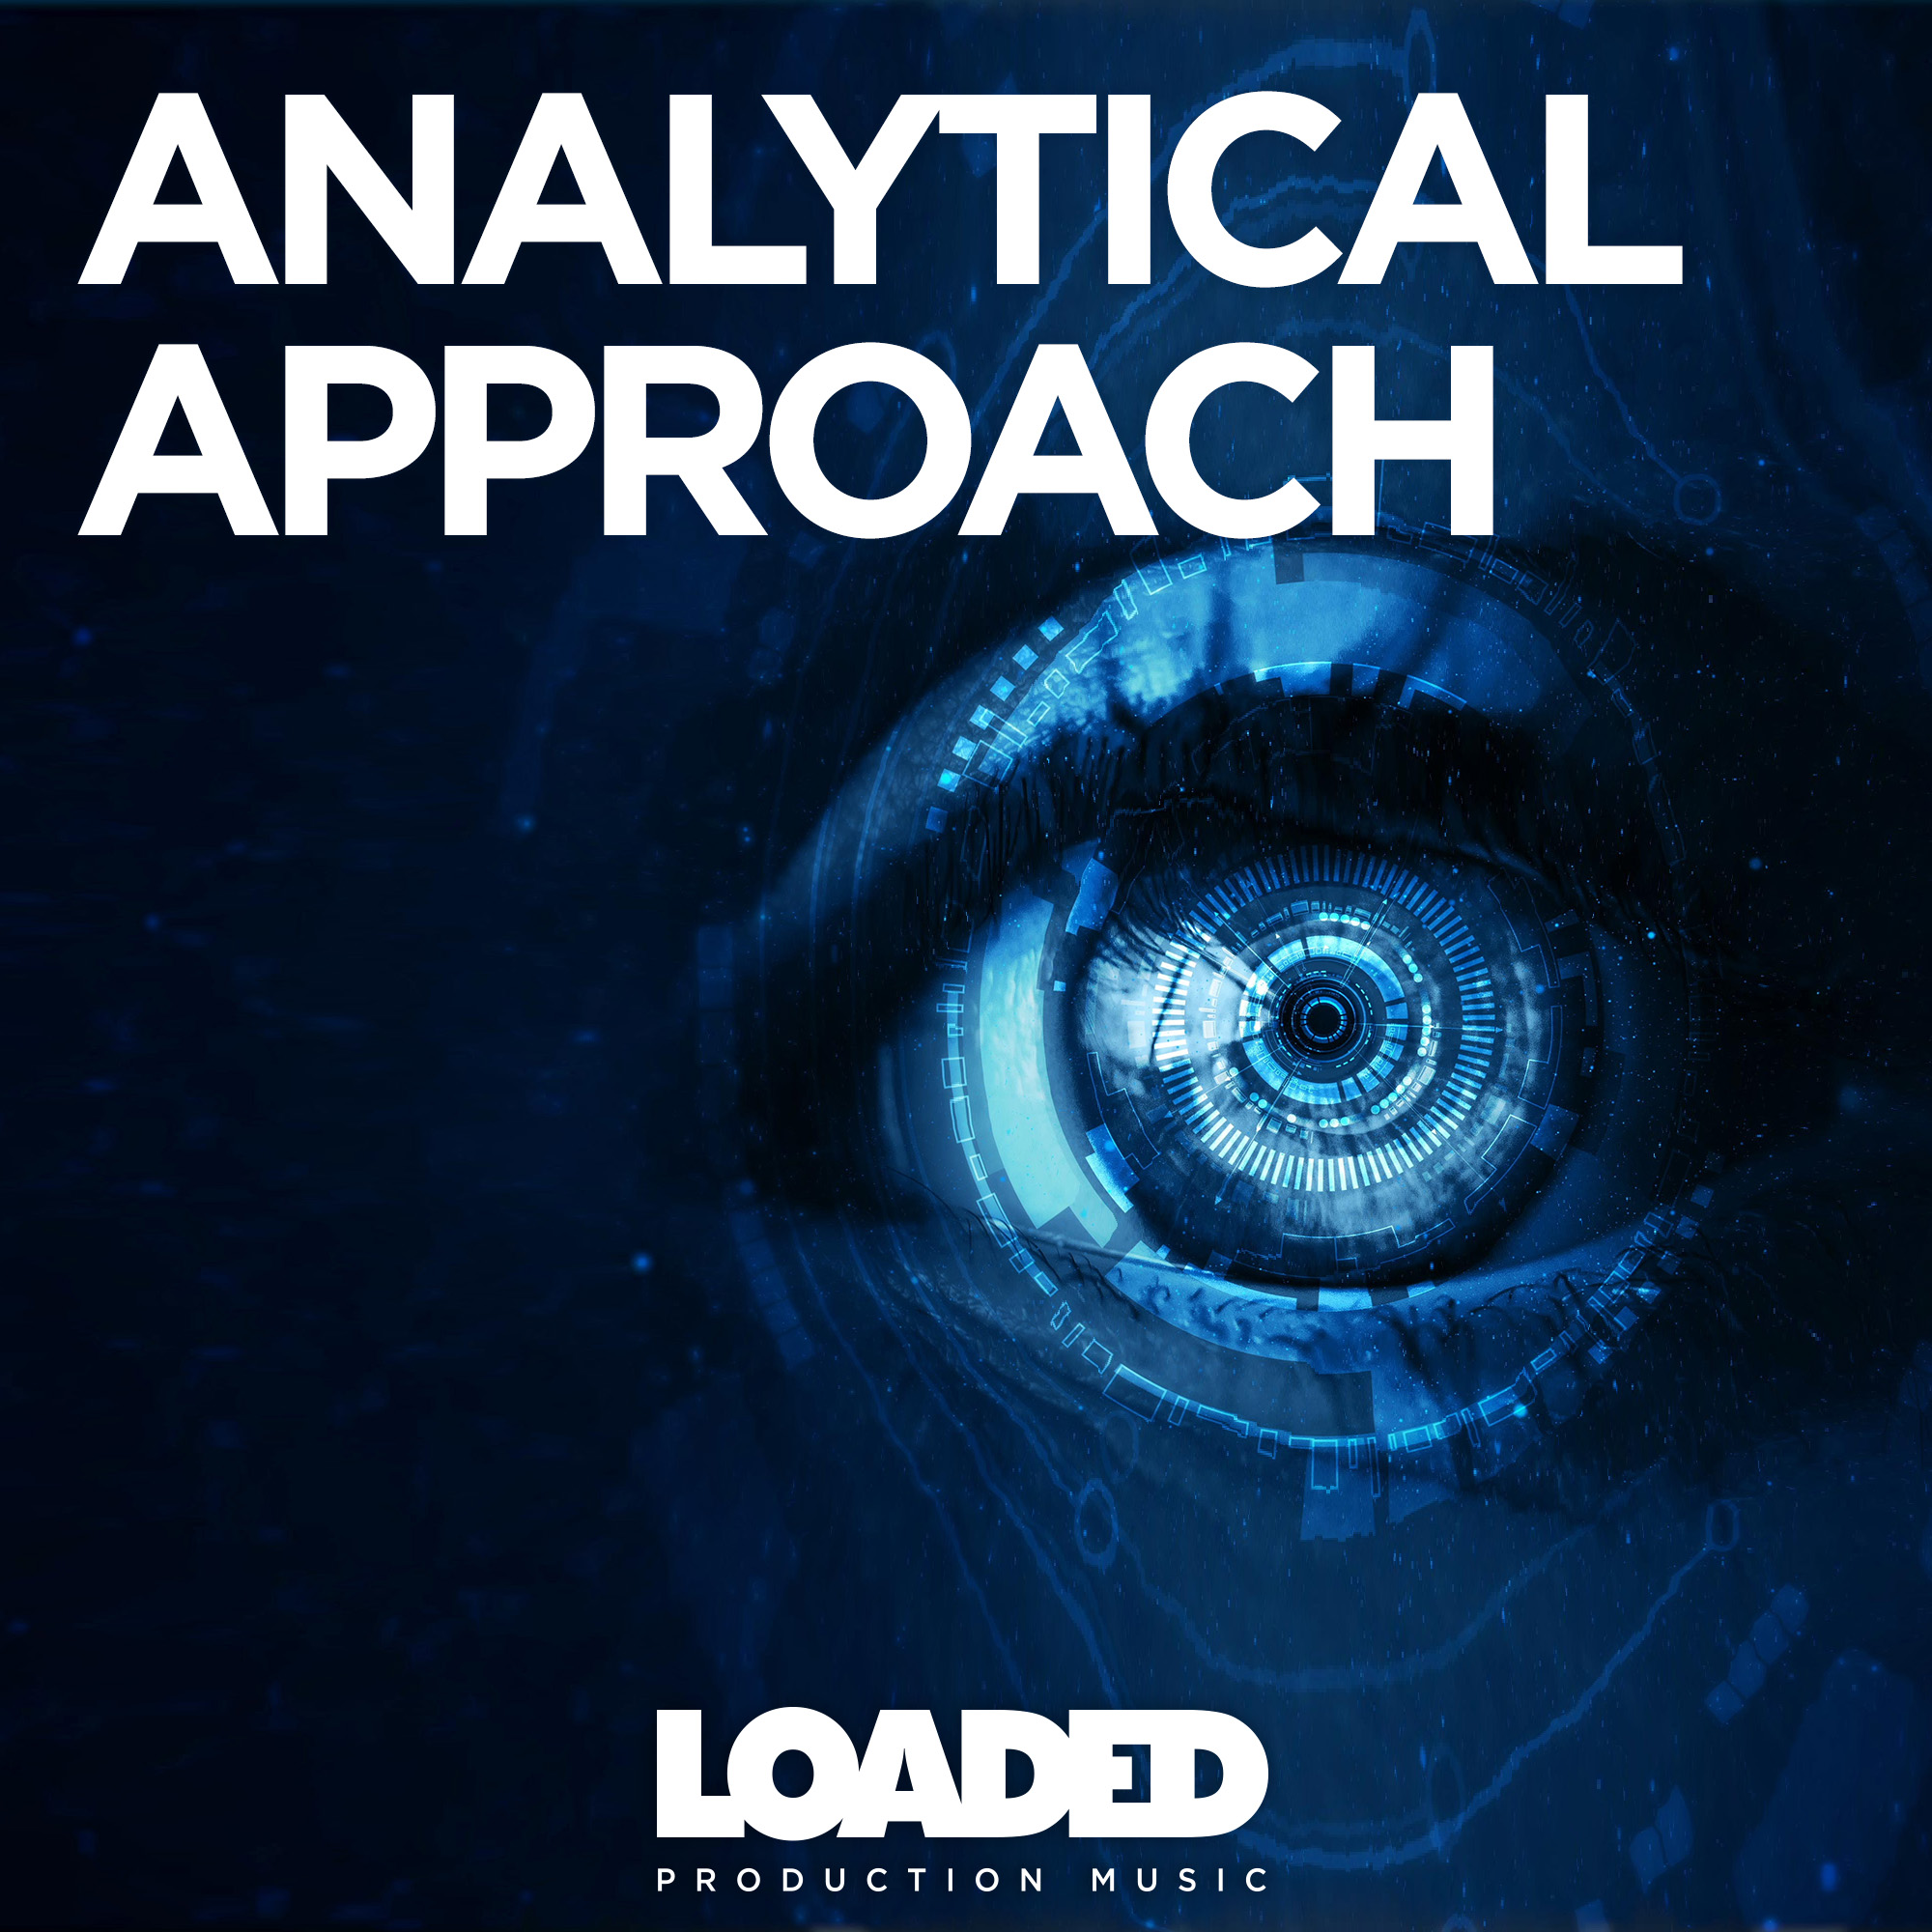 LPM 111 - Analytical Approach - Album Cover